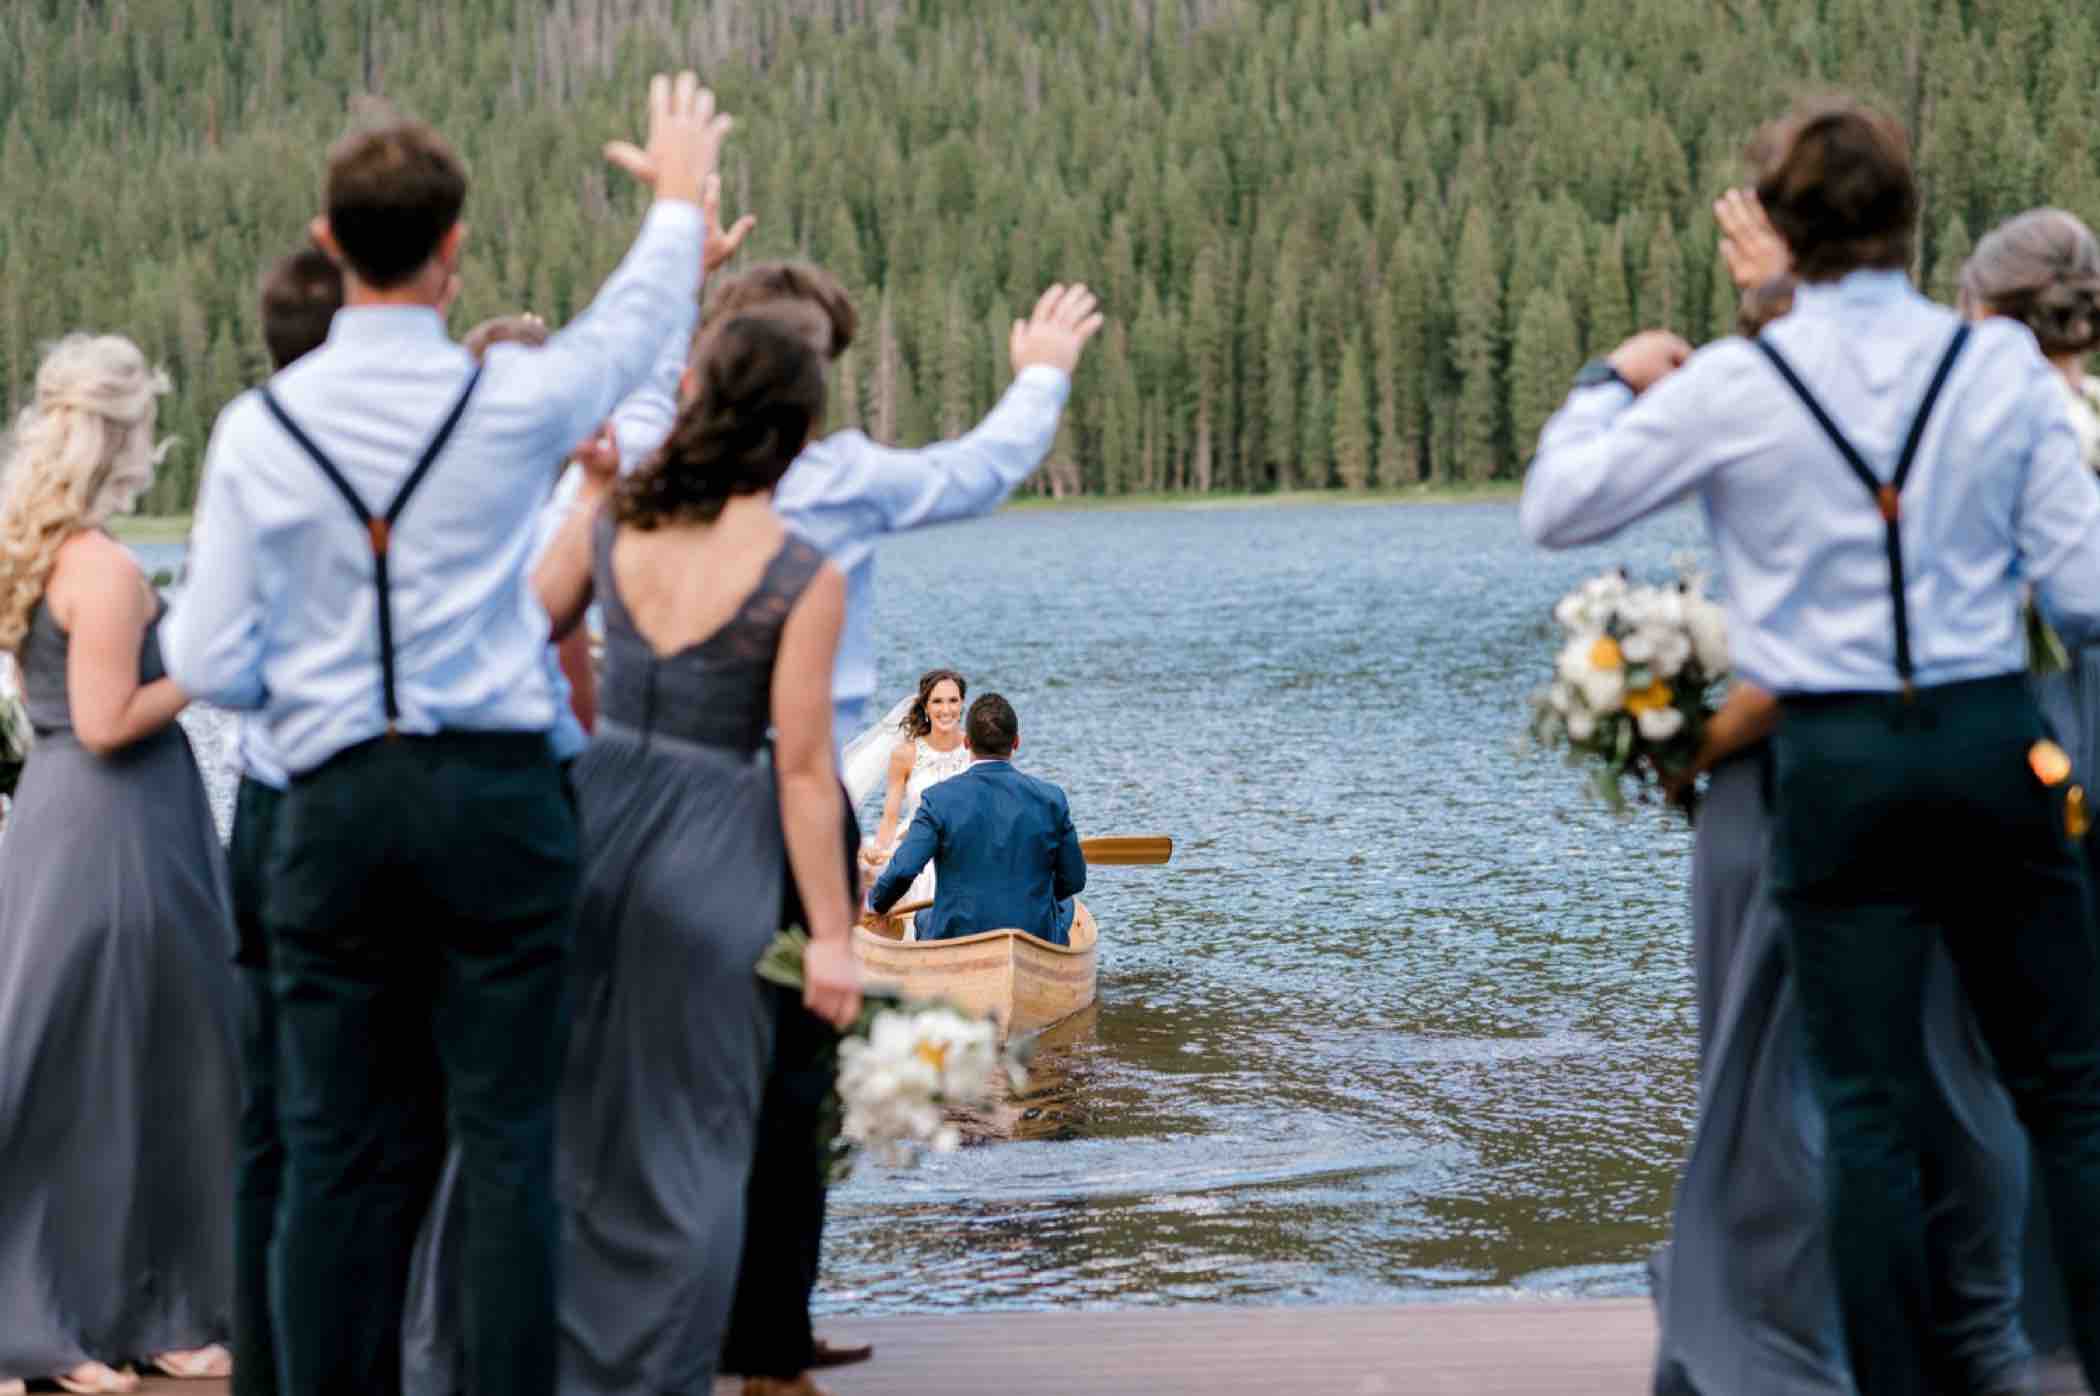 Bride and groom leave in a canoe on Piney Lake in Piney River Ranch in Vail Colorado. Photo by Ali and Garrett, Romantic, Adventurous, Nostalgic Wedding Photographers.